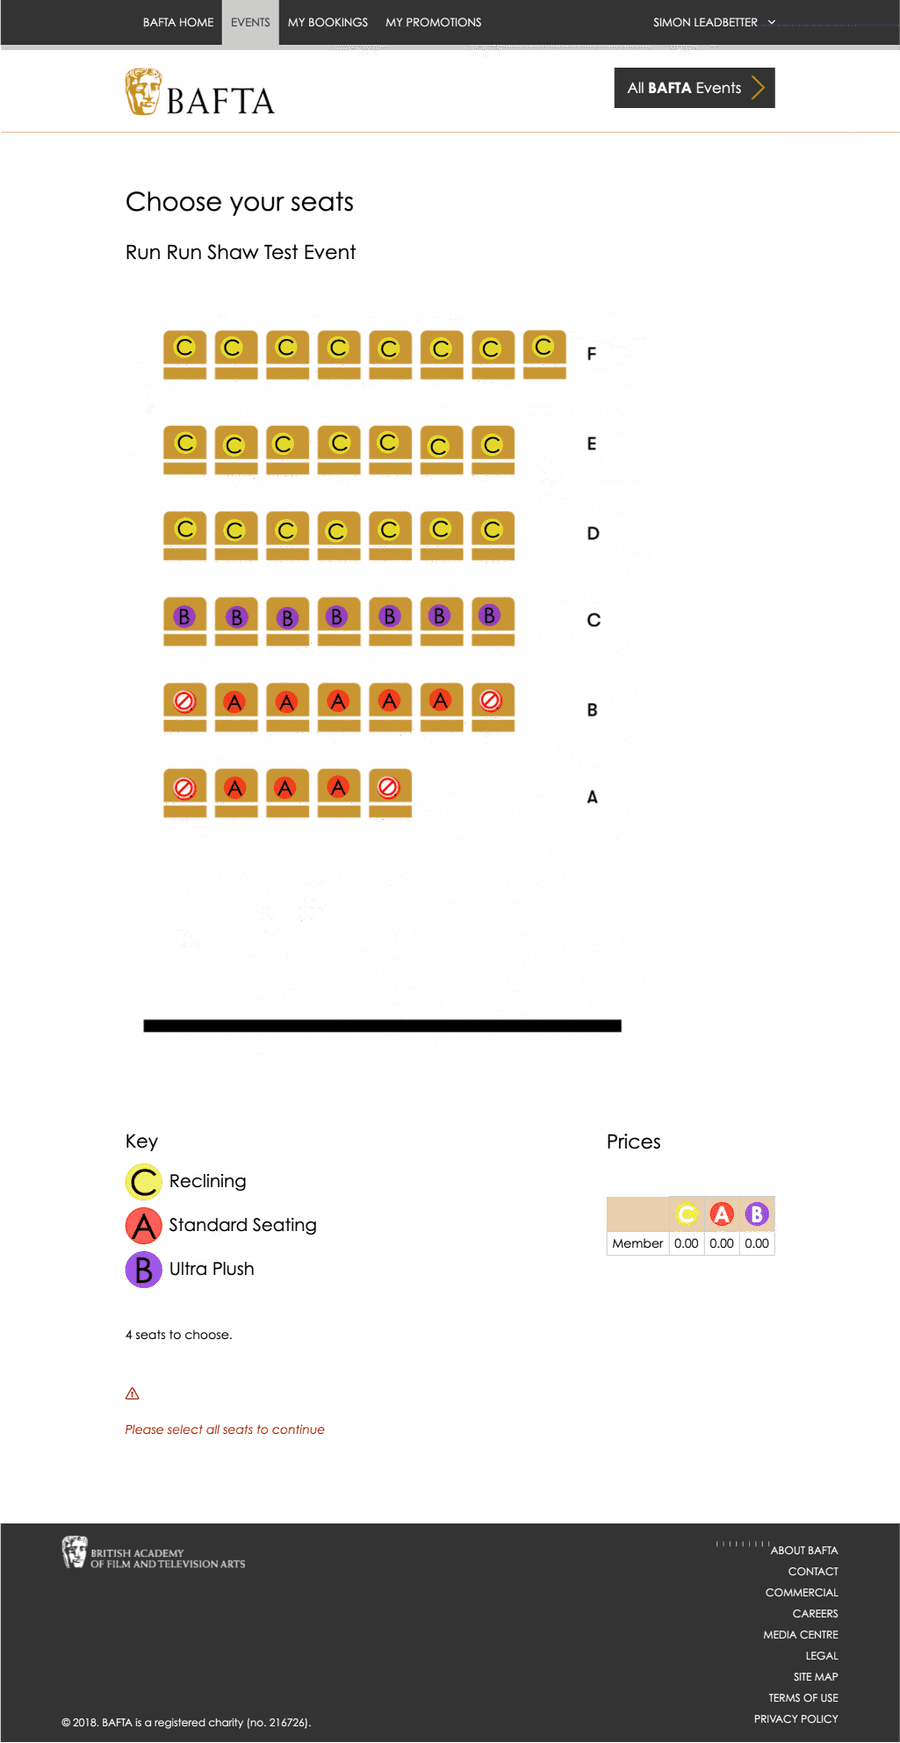 Screenshot of confusing seating plan on original website. It contains rows of faux chair icons with additional icons overlaid containing a letter that corresponds to key at the bottom of the page.